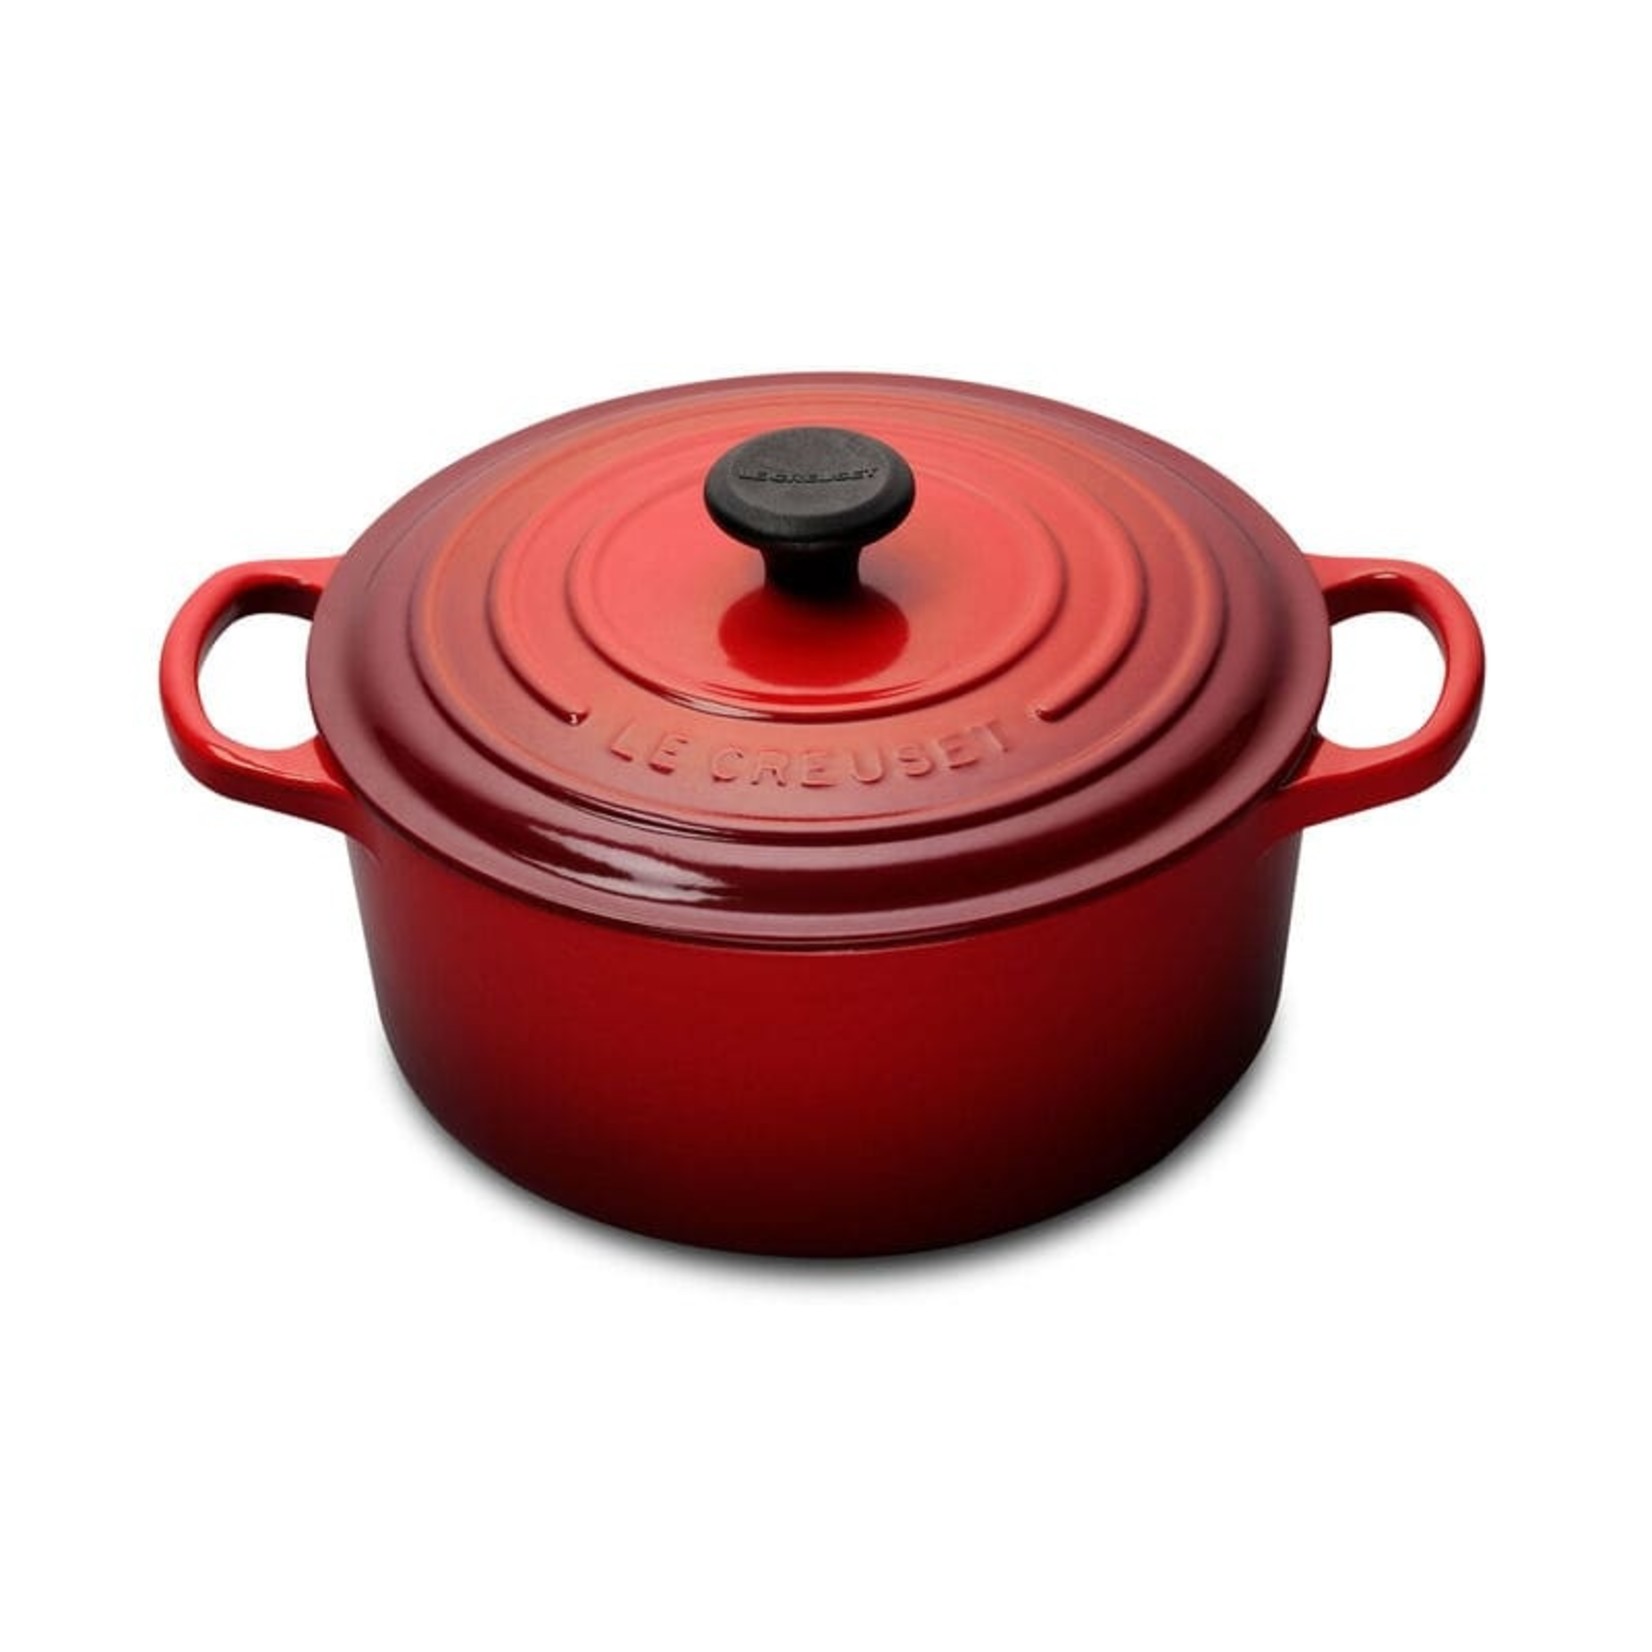 LE CREUSET LE CREUSET Round French Oven 3.3L